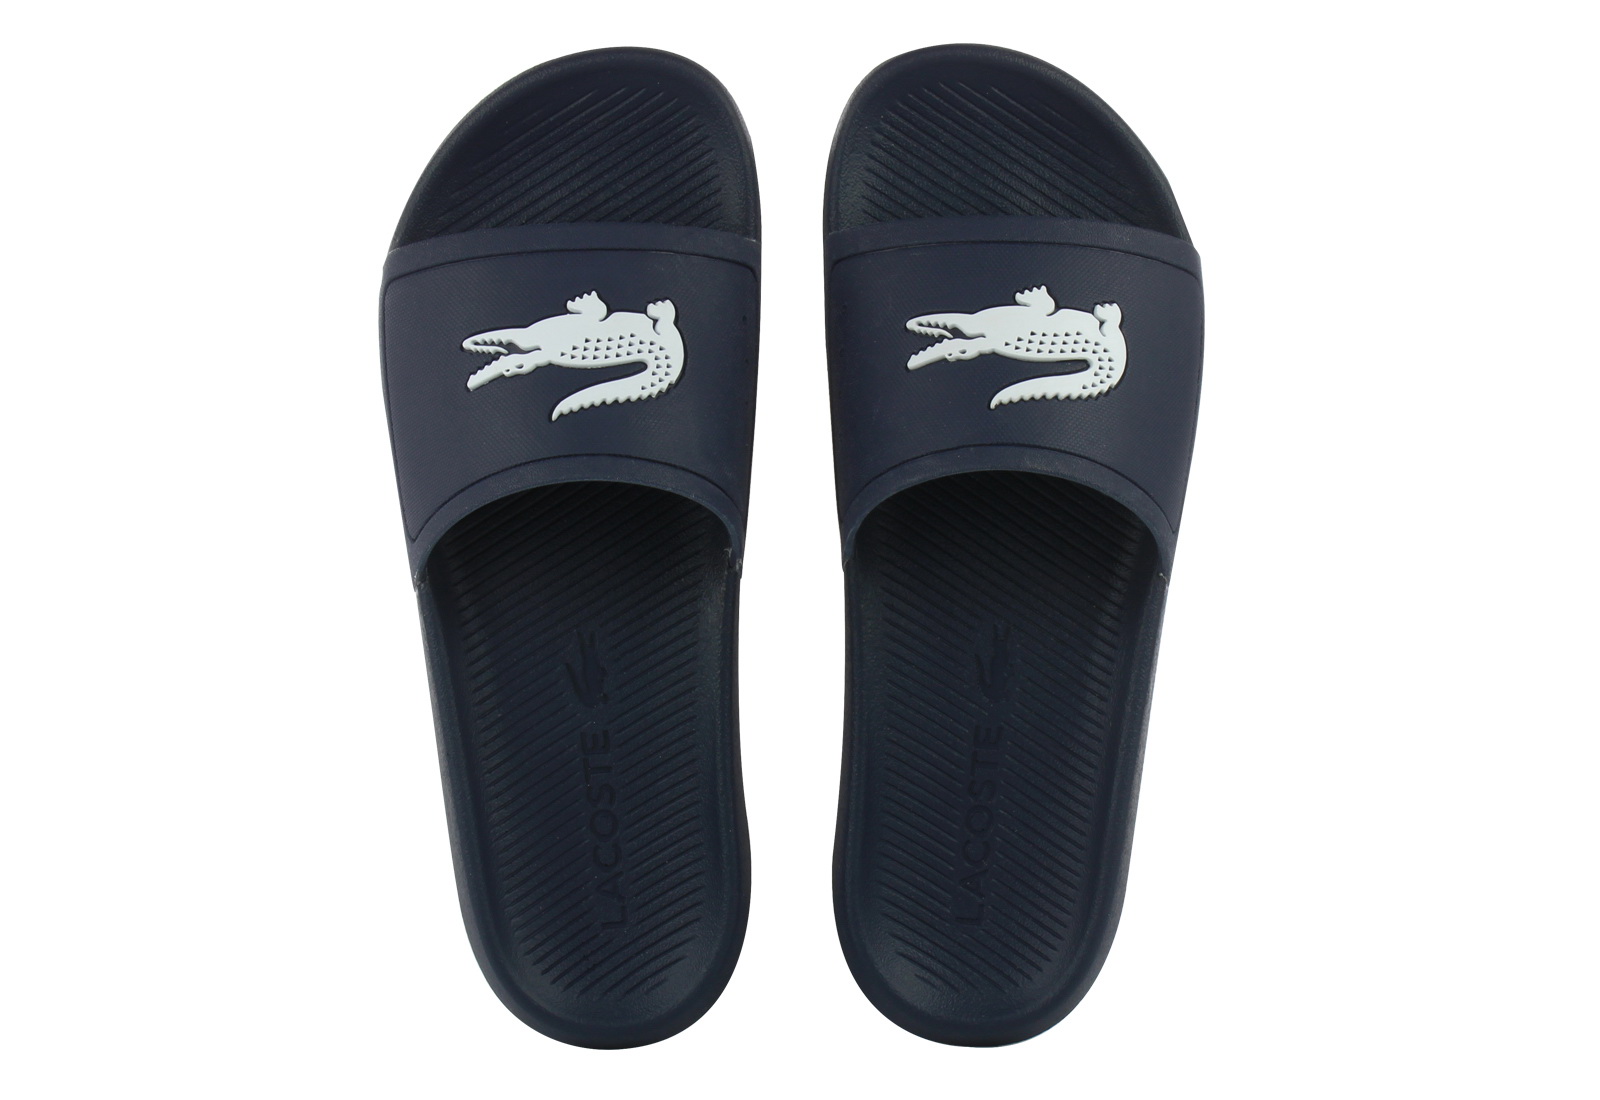 lacoste slip on slippers - 61% OFF 